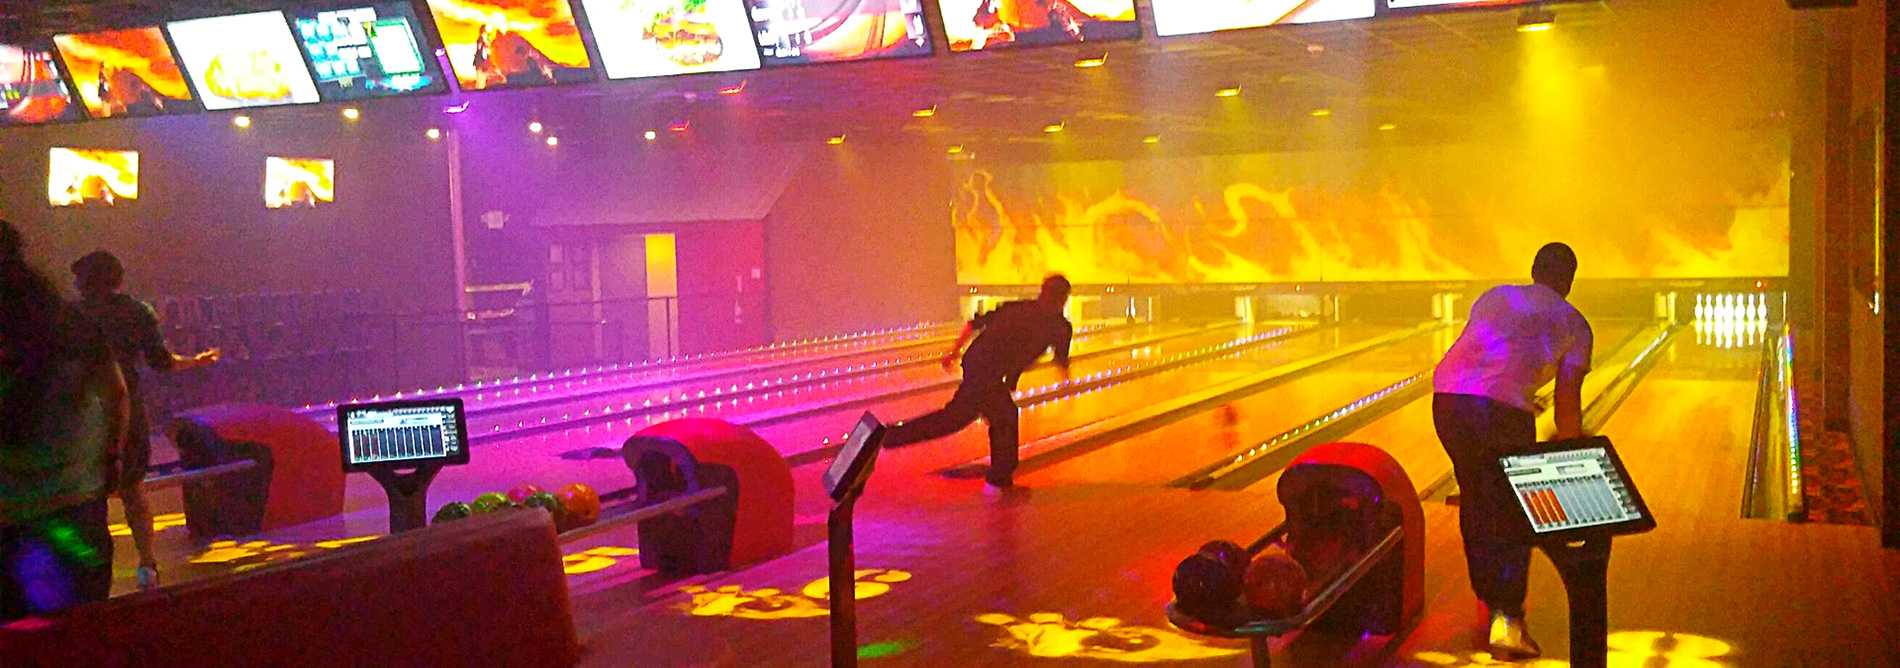 QUBICAAMF-bowling-boutique-The-Firehouse-banner.jpg